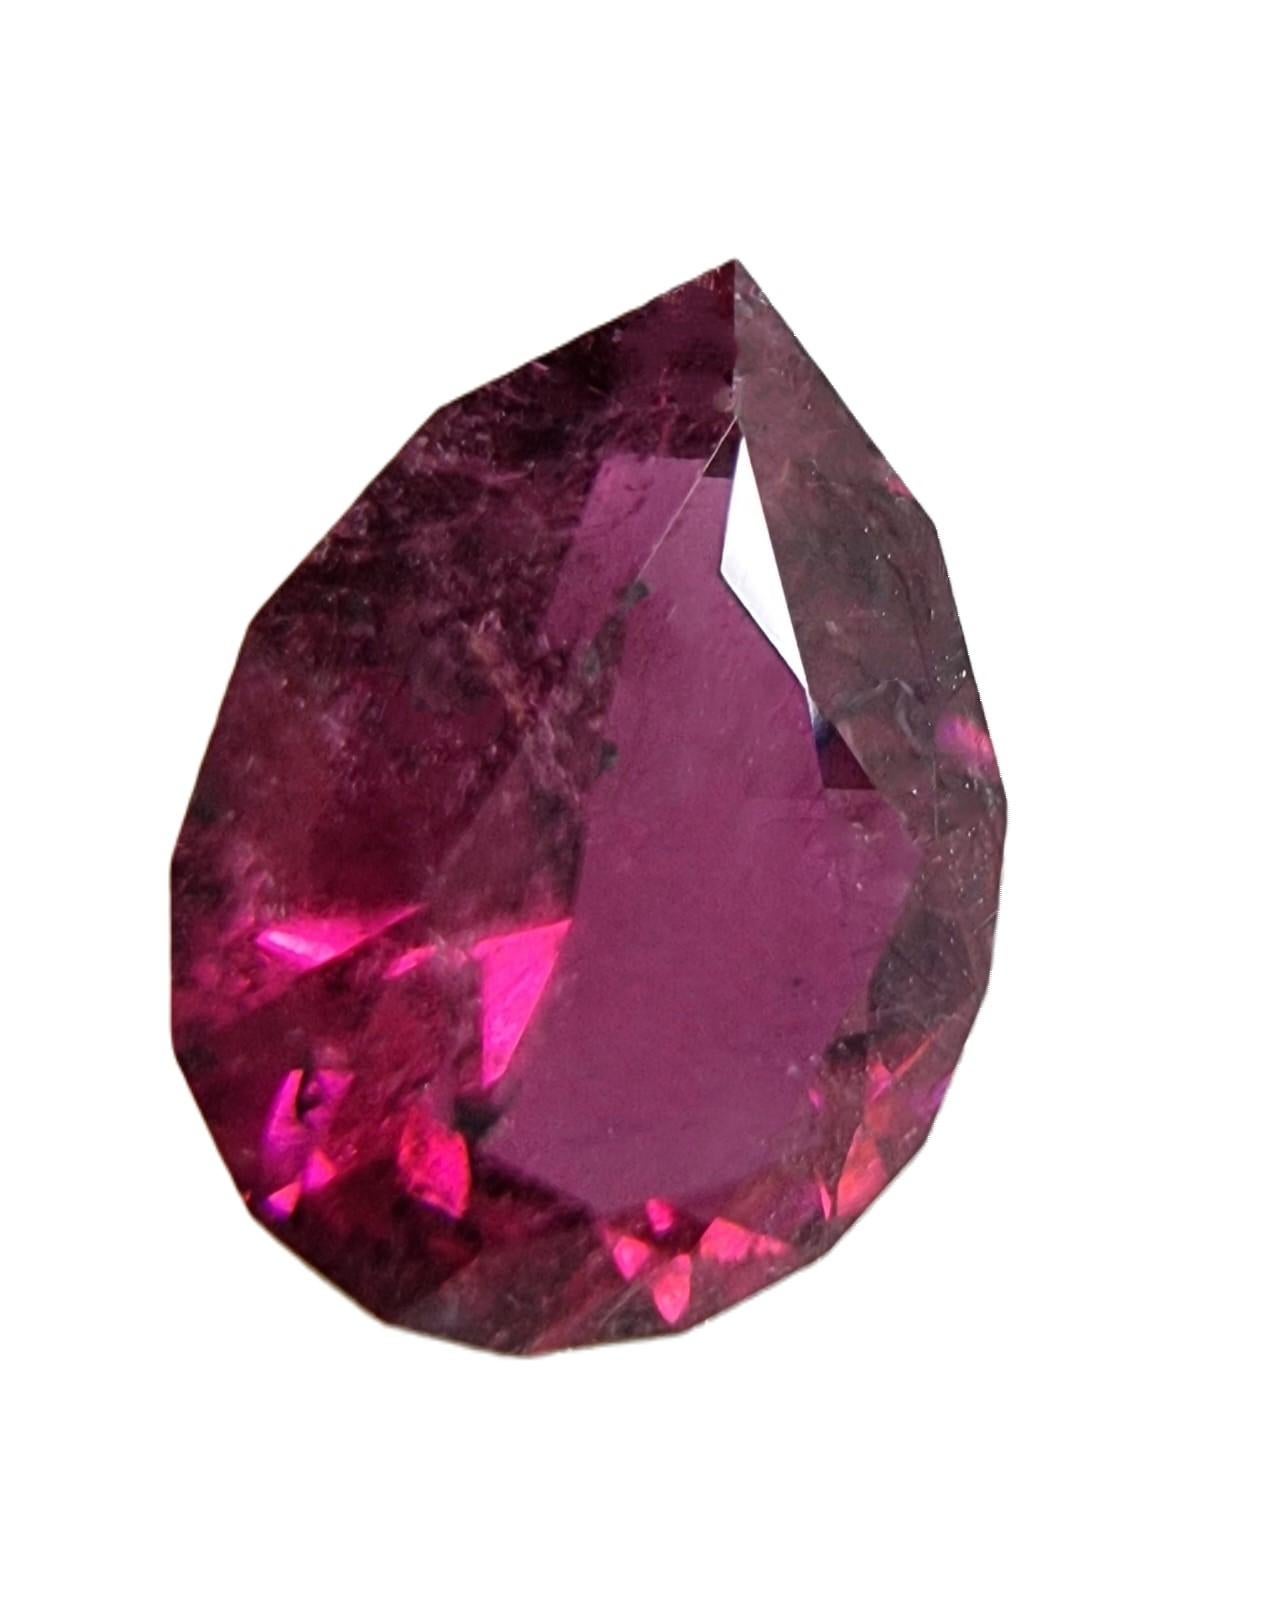 Introducing the exquisite beauty of our 2.63-carat Pear Cut Pinkish Red Rubellite Tourmaline Loose Gemstone. 

Gemstone Details:
Carat Weight: 2.63 carats
Shape: Pear Cut
Variety: Pinkish Red Rubellite Tourmaline
Dimension:  10mm x 7.0mm x